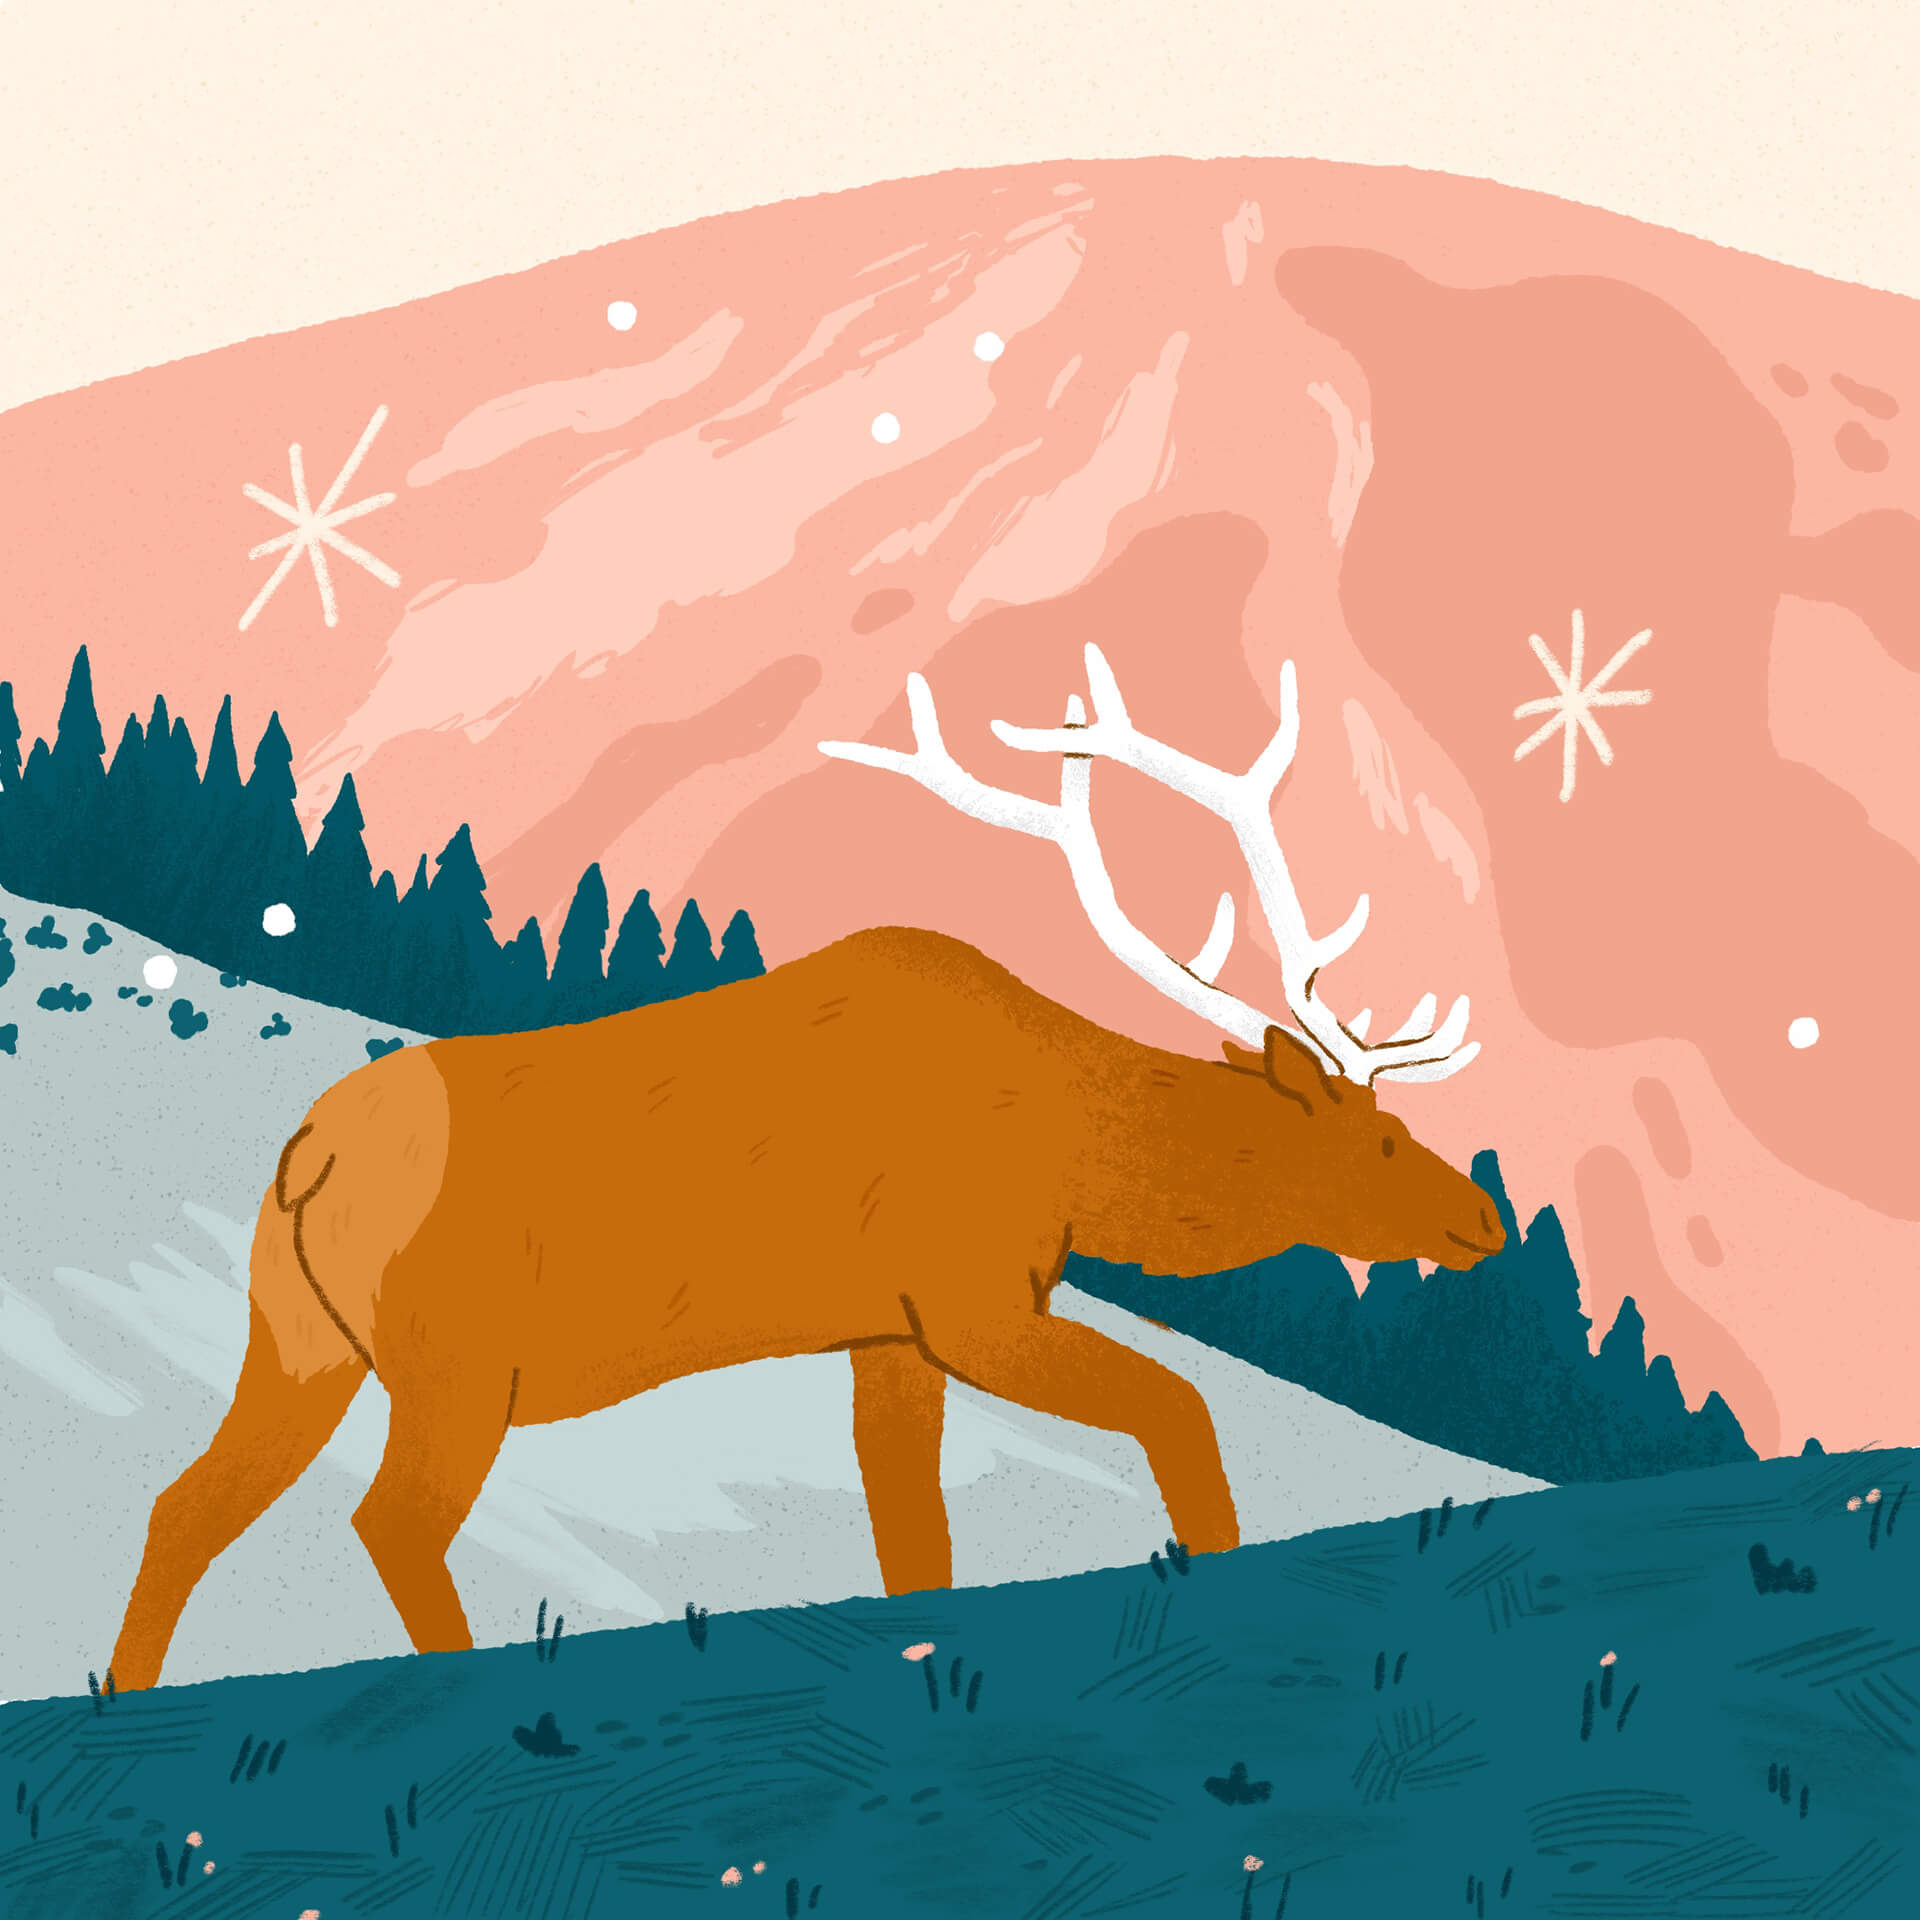 An illustration of an elk climbing a grassy slope among pink and blue mountains